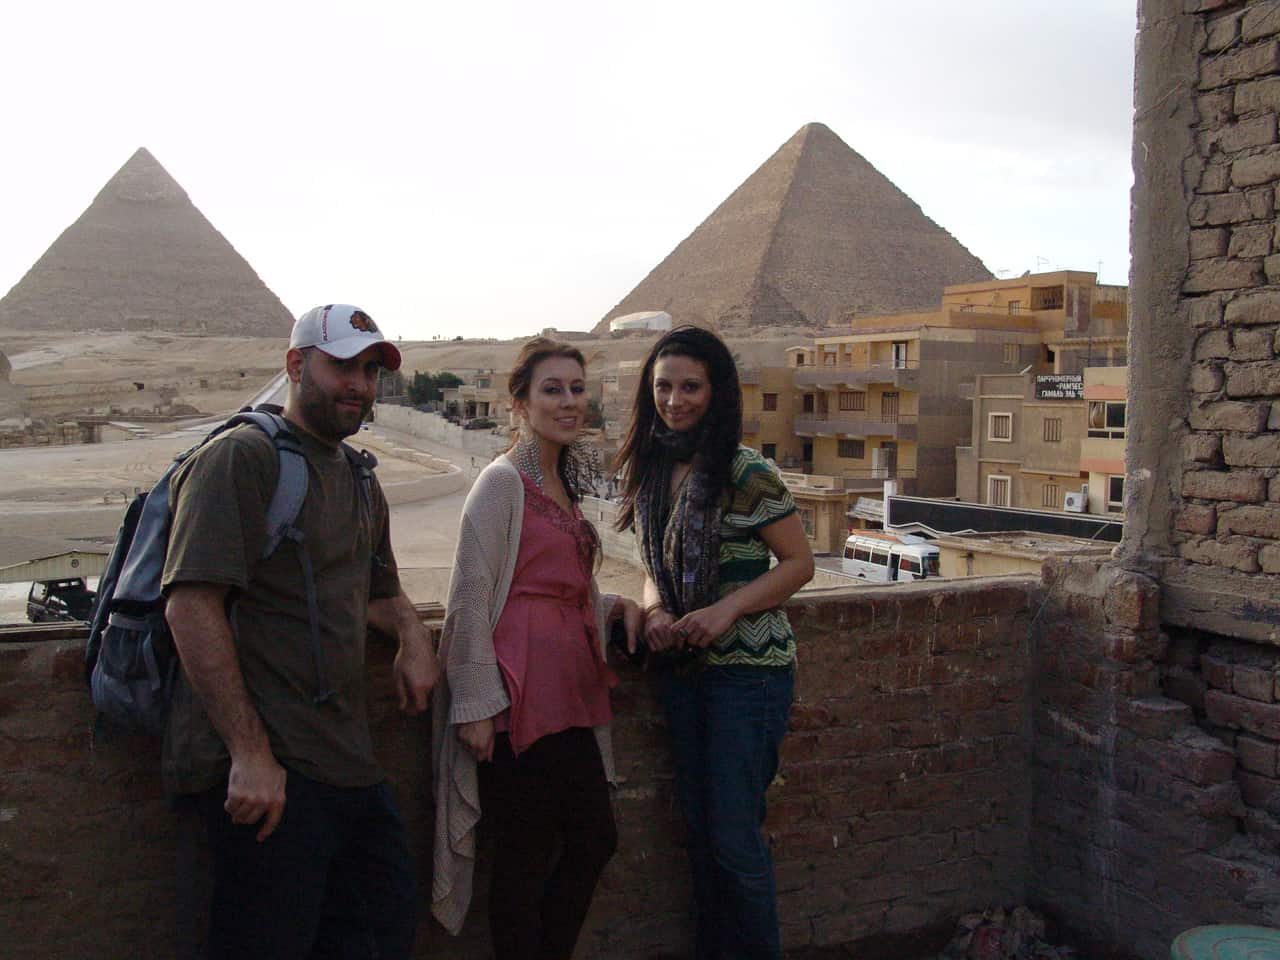 Me, Maria, and Dana posing in front of the pyramids in Giza, Egypt